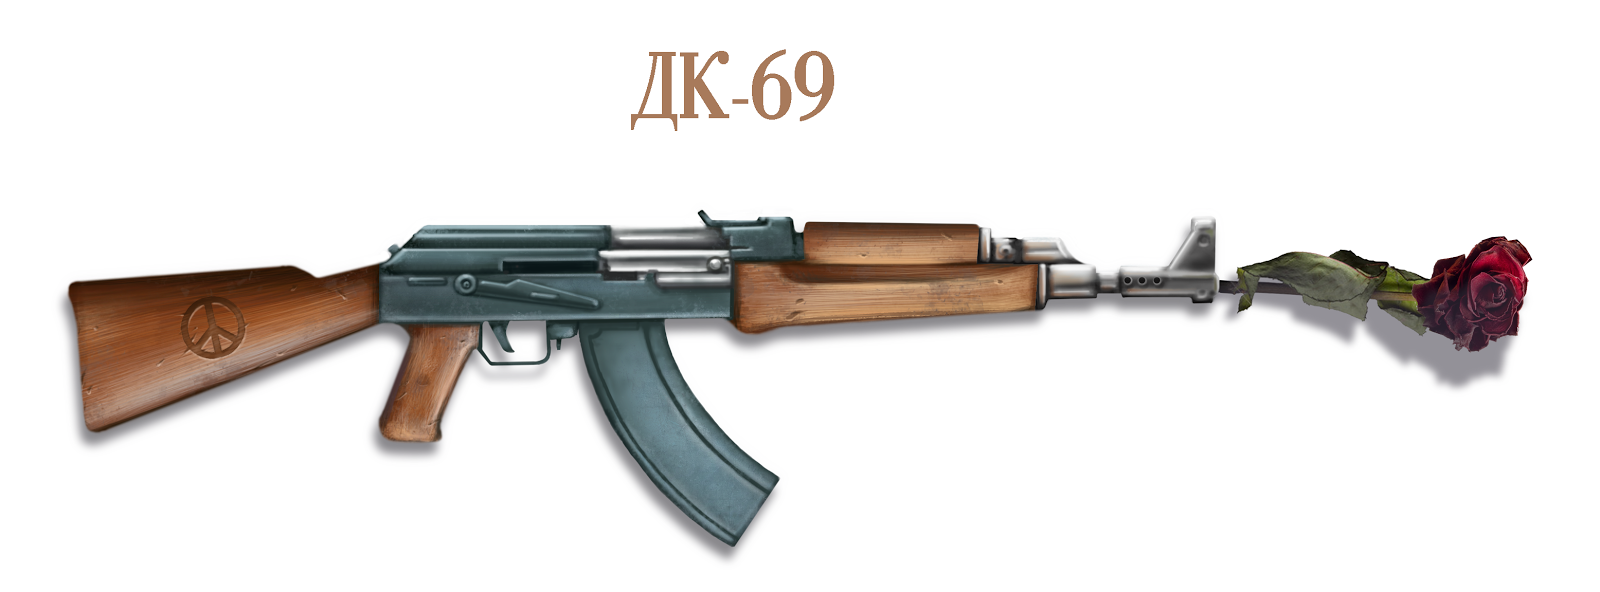 AK-47 peace and love